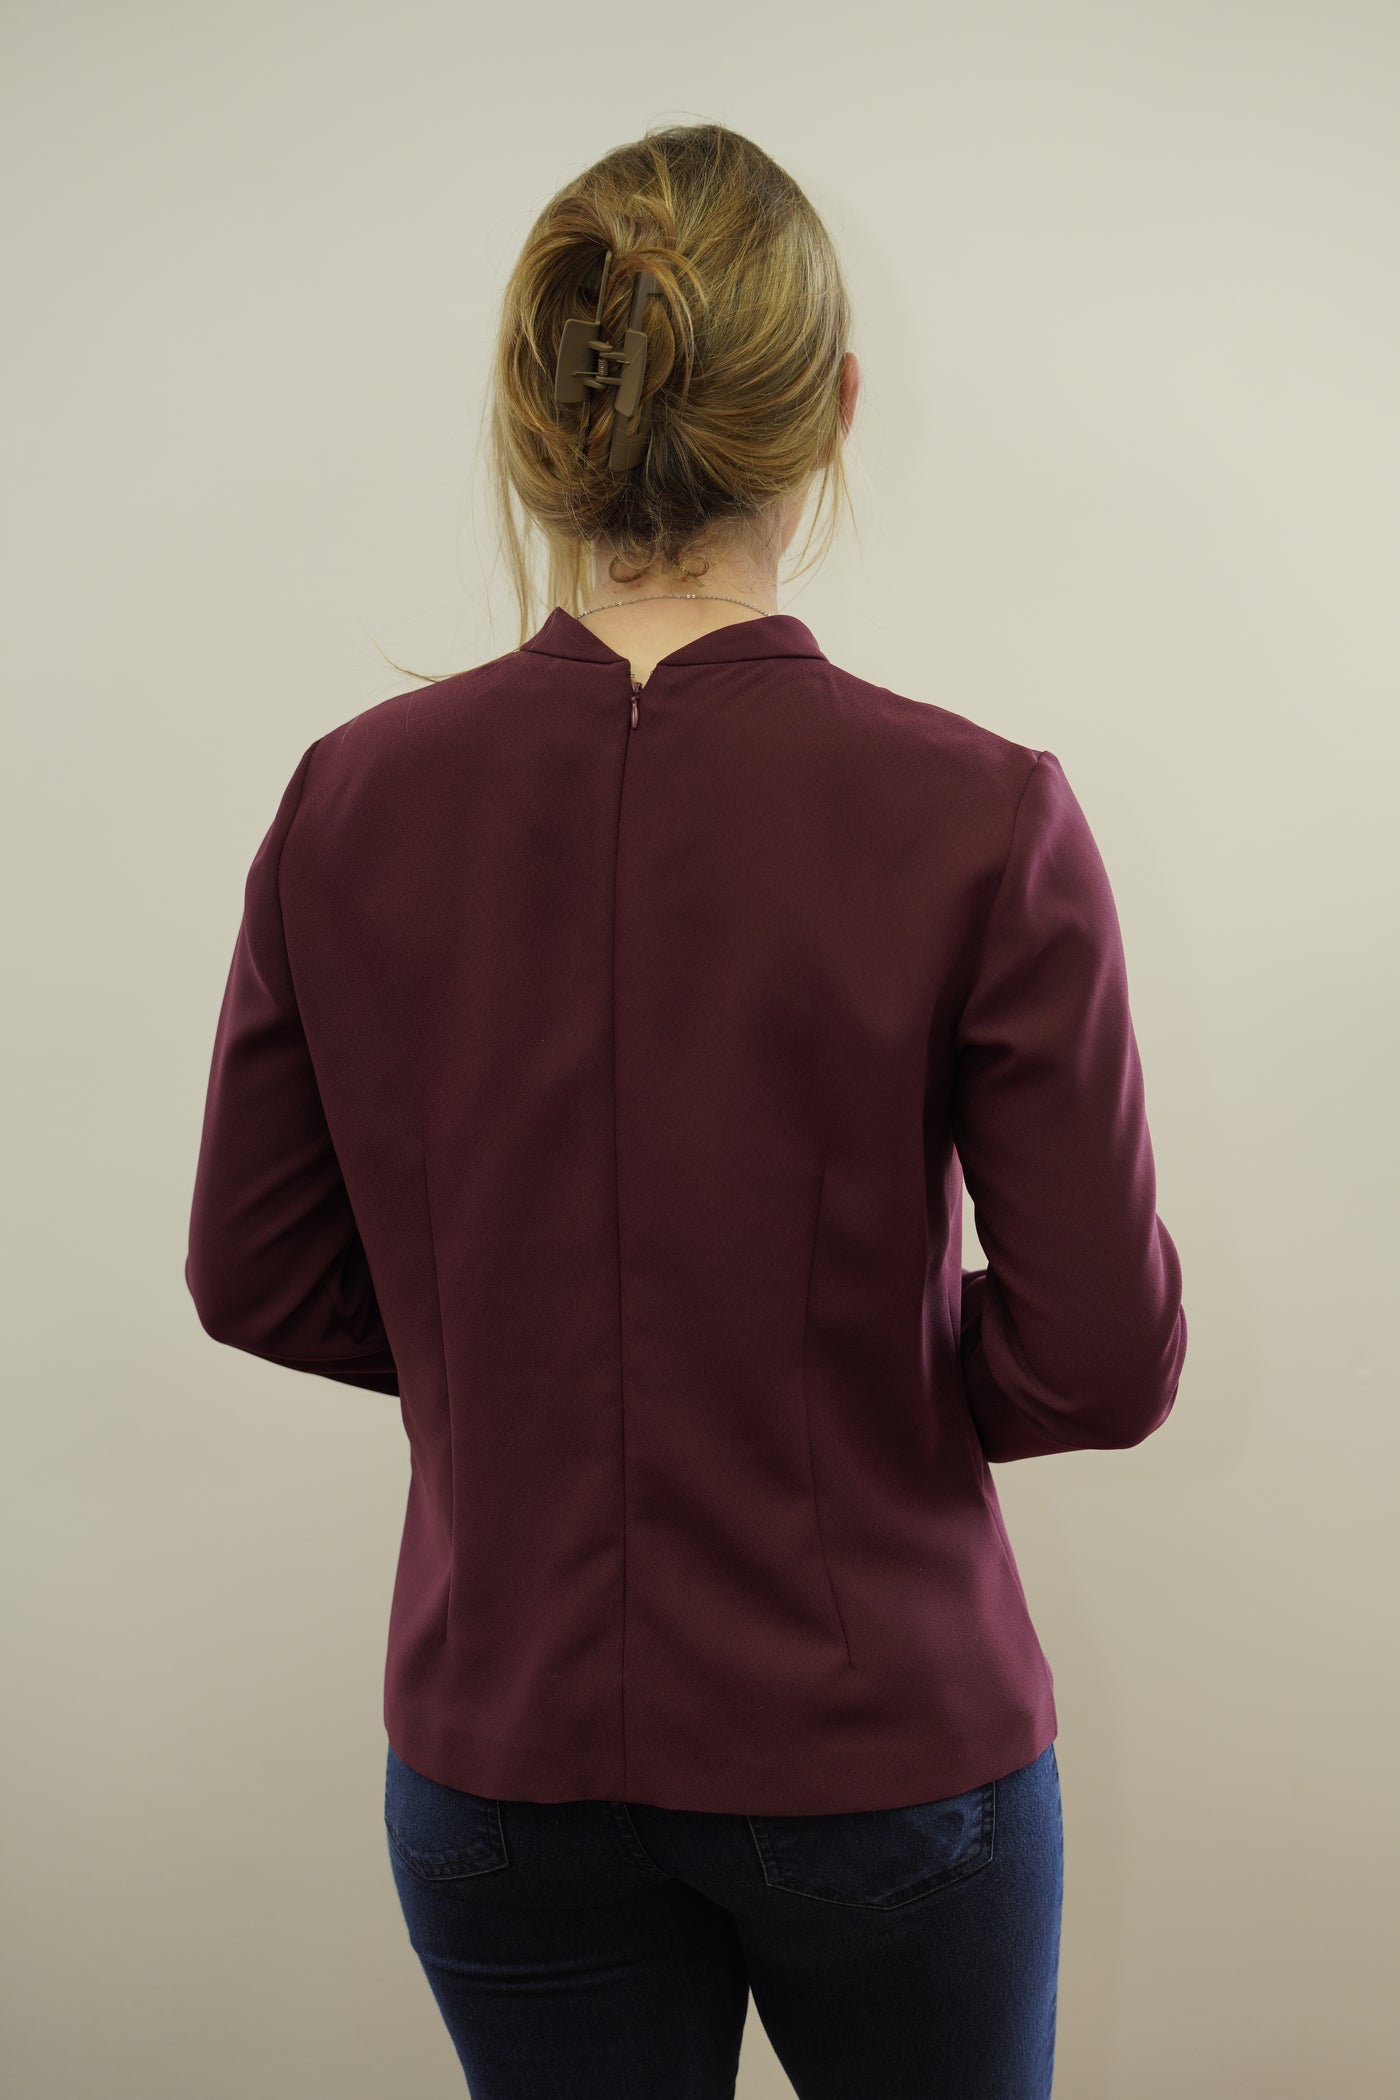 Carven maroon blouse size 42